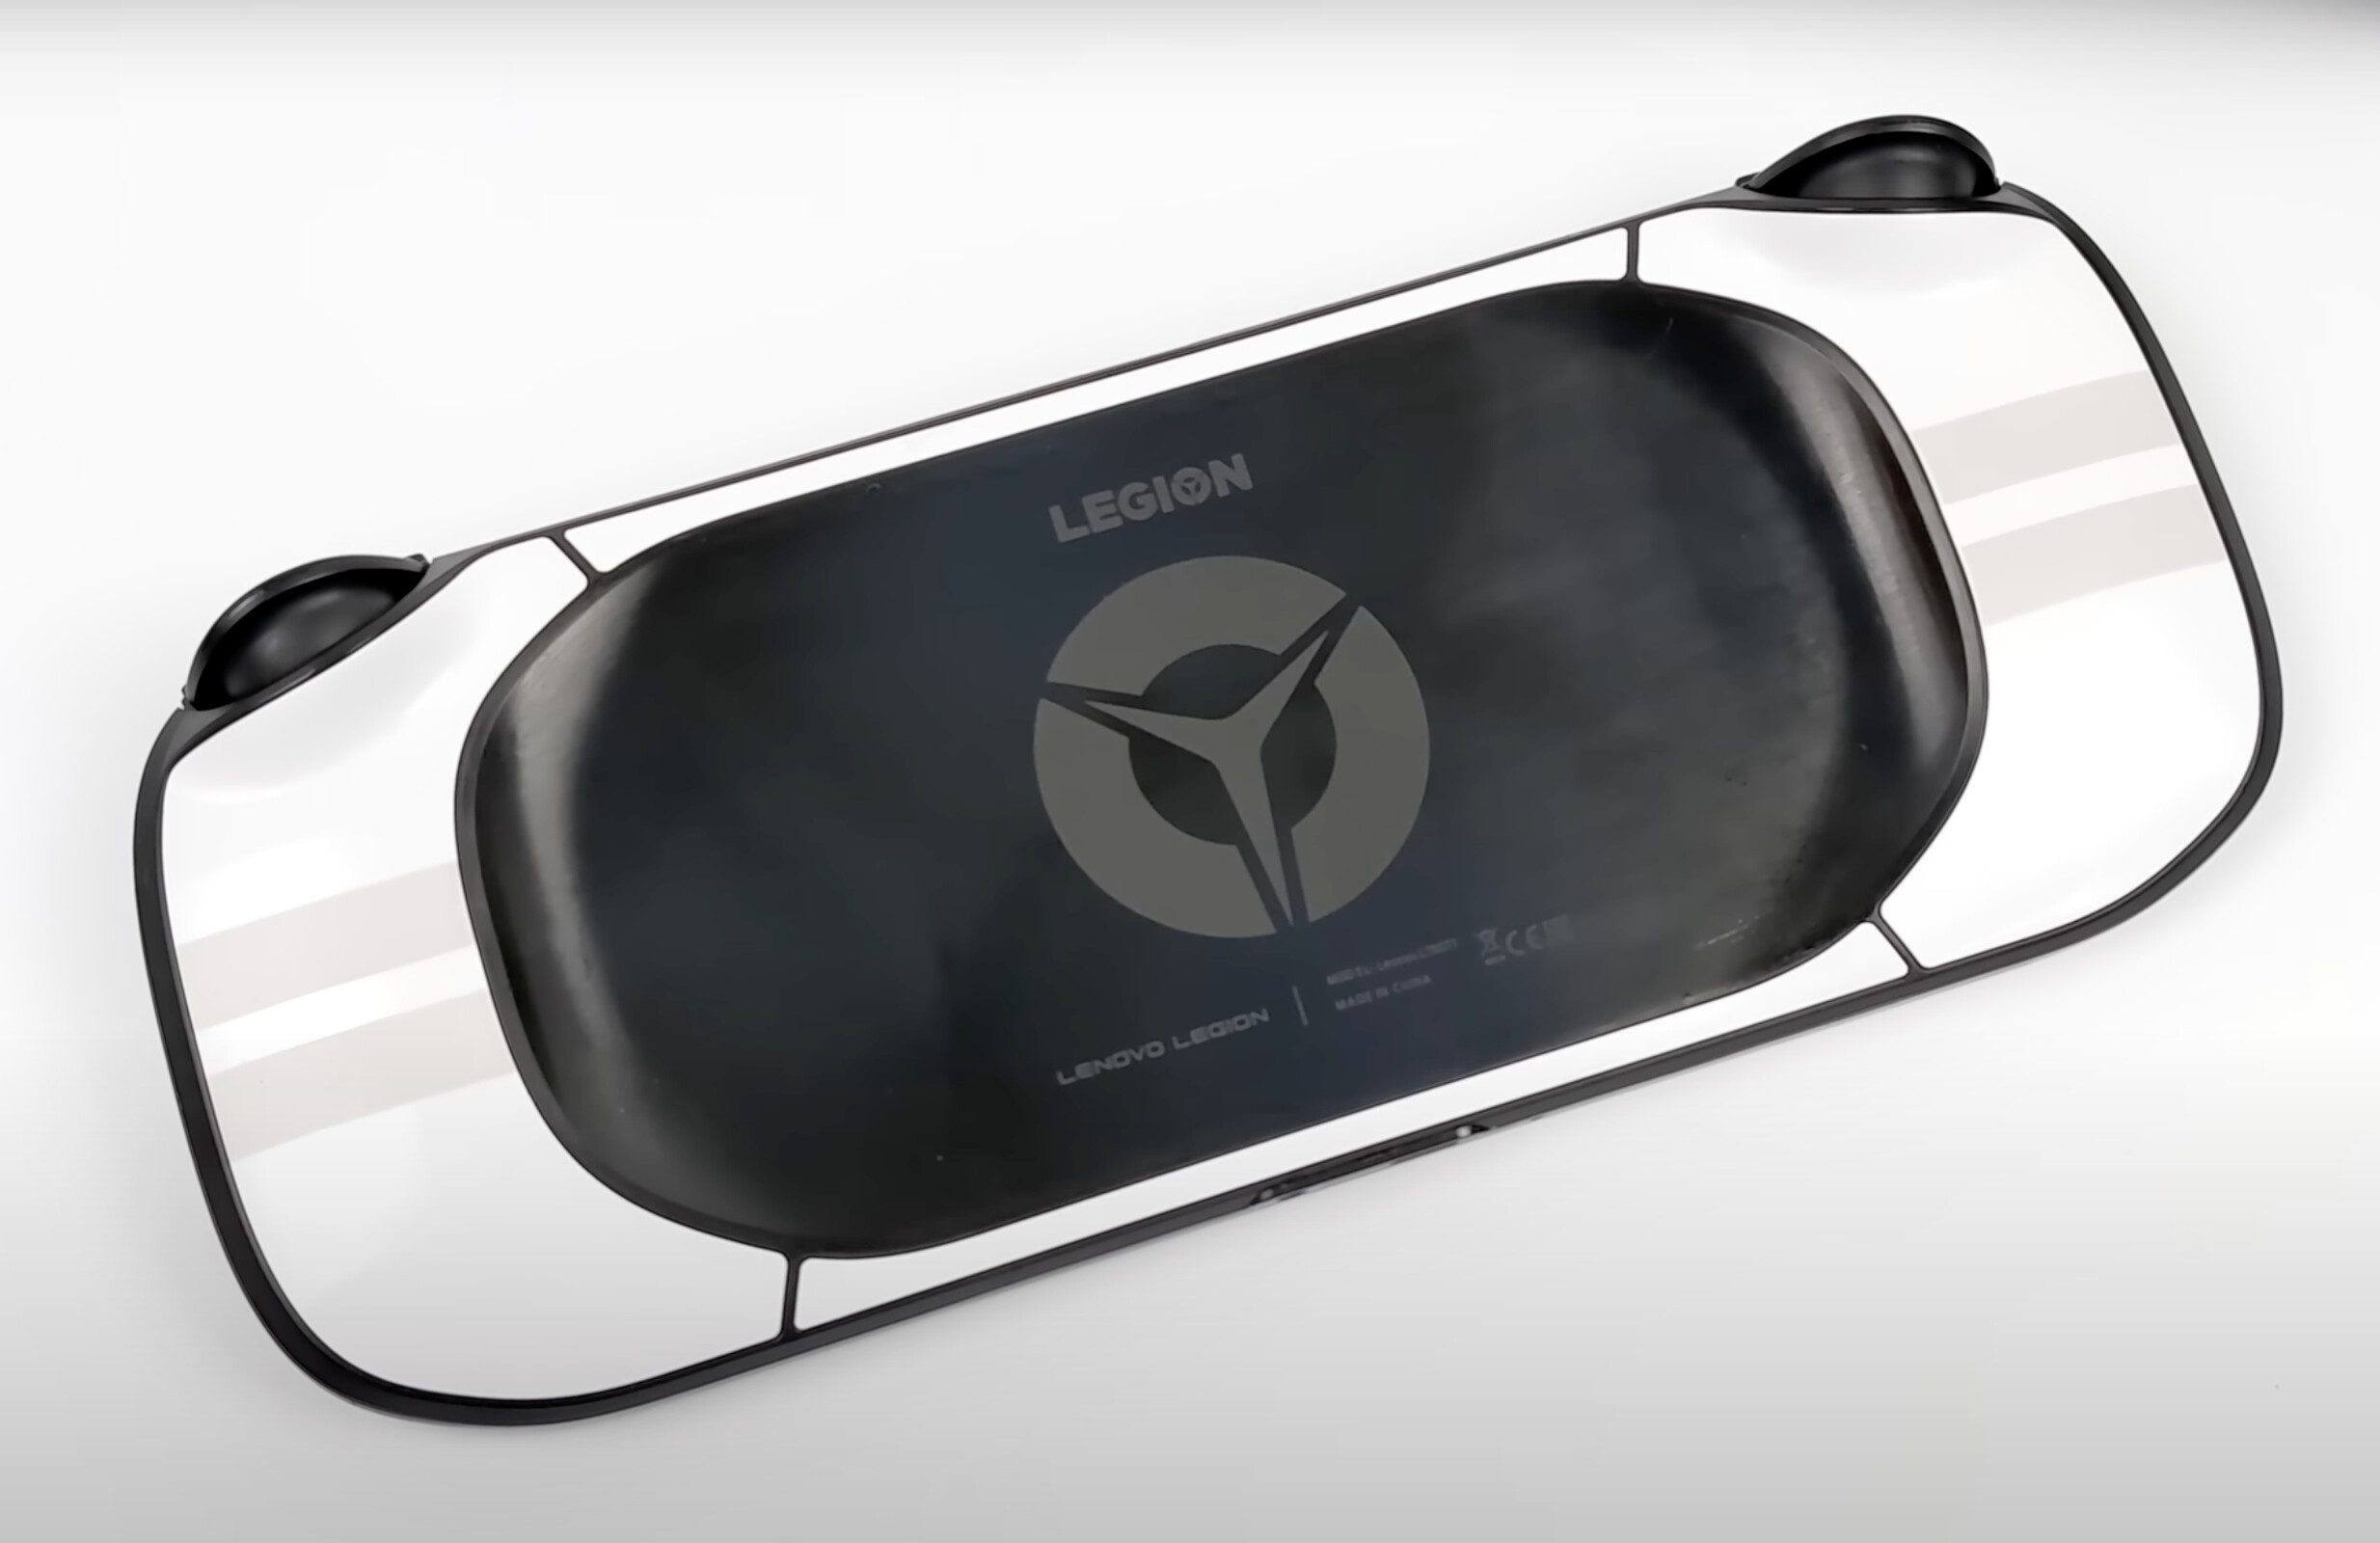 Lenovo is reportedly working on a PC gaming handheld called the